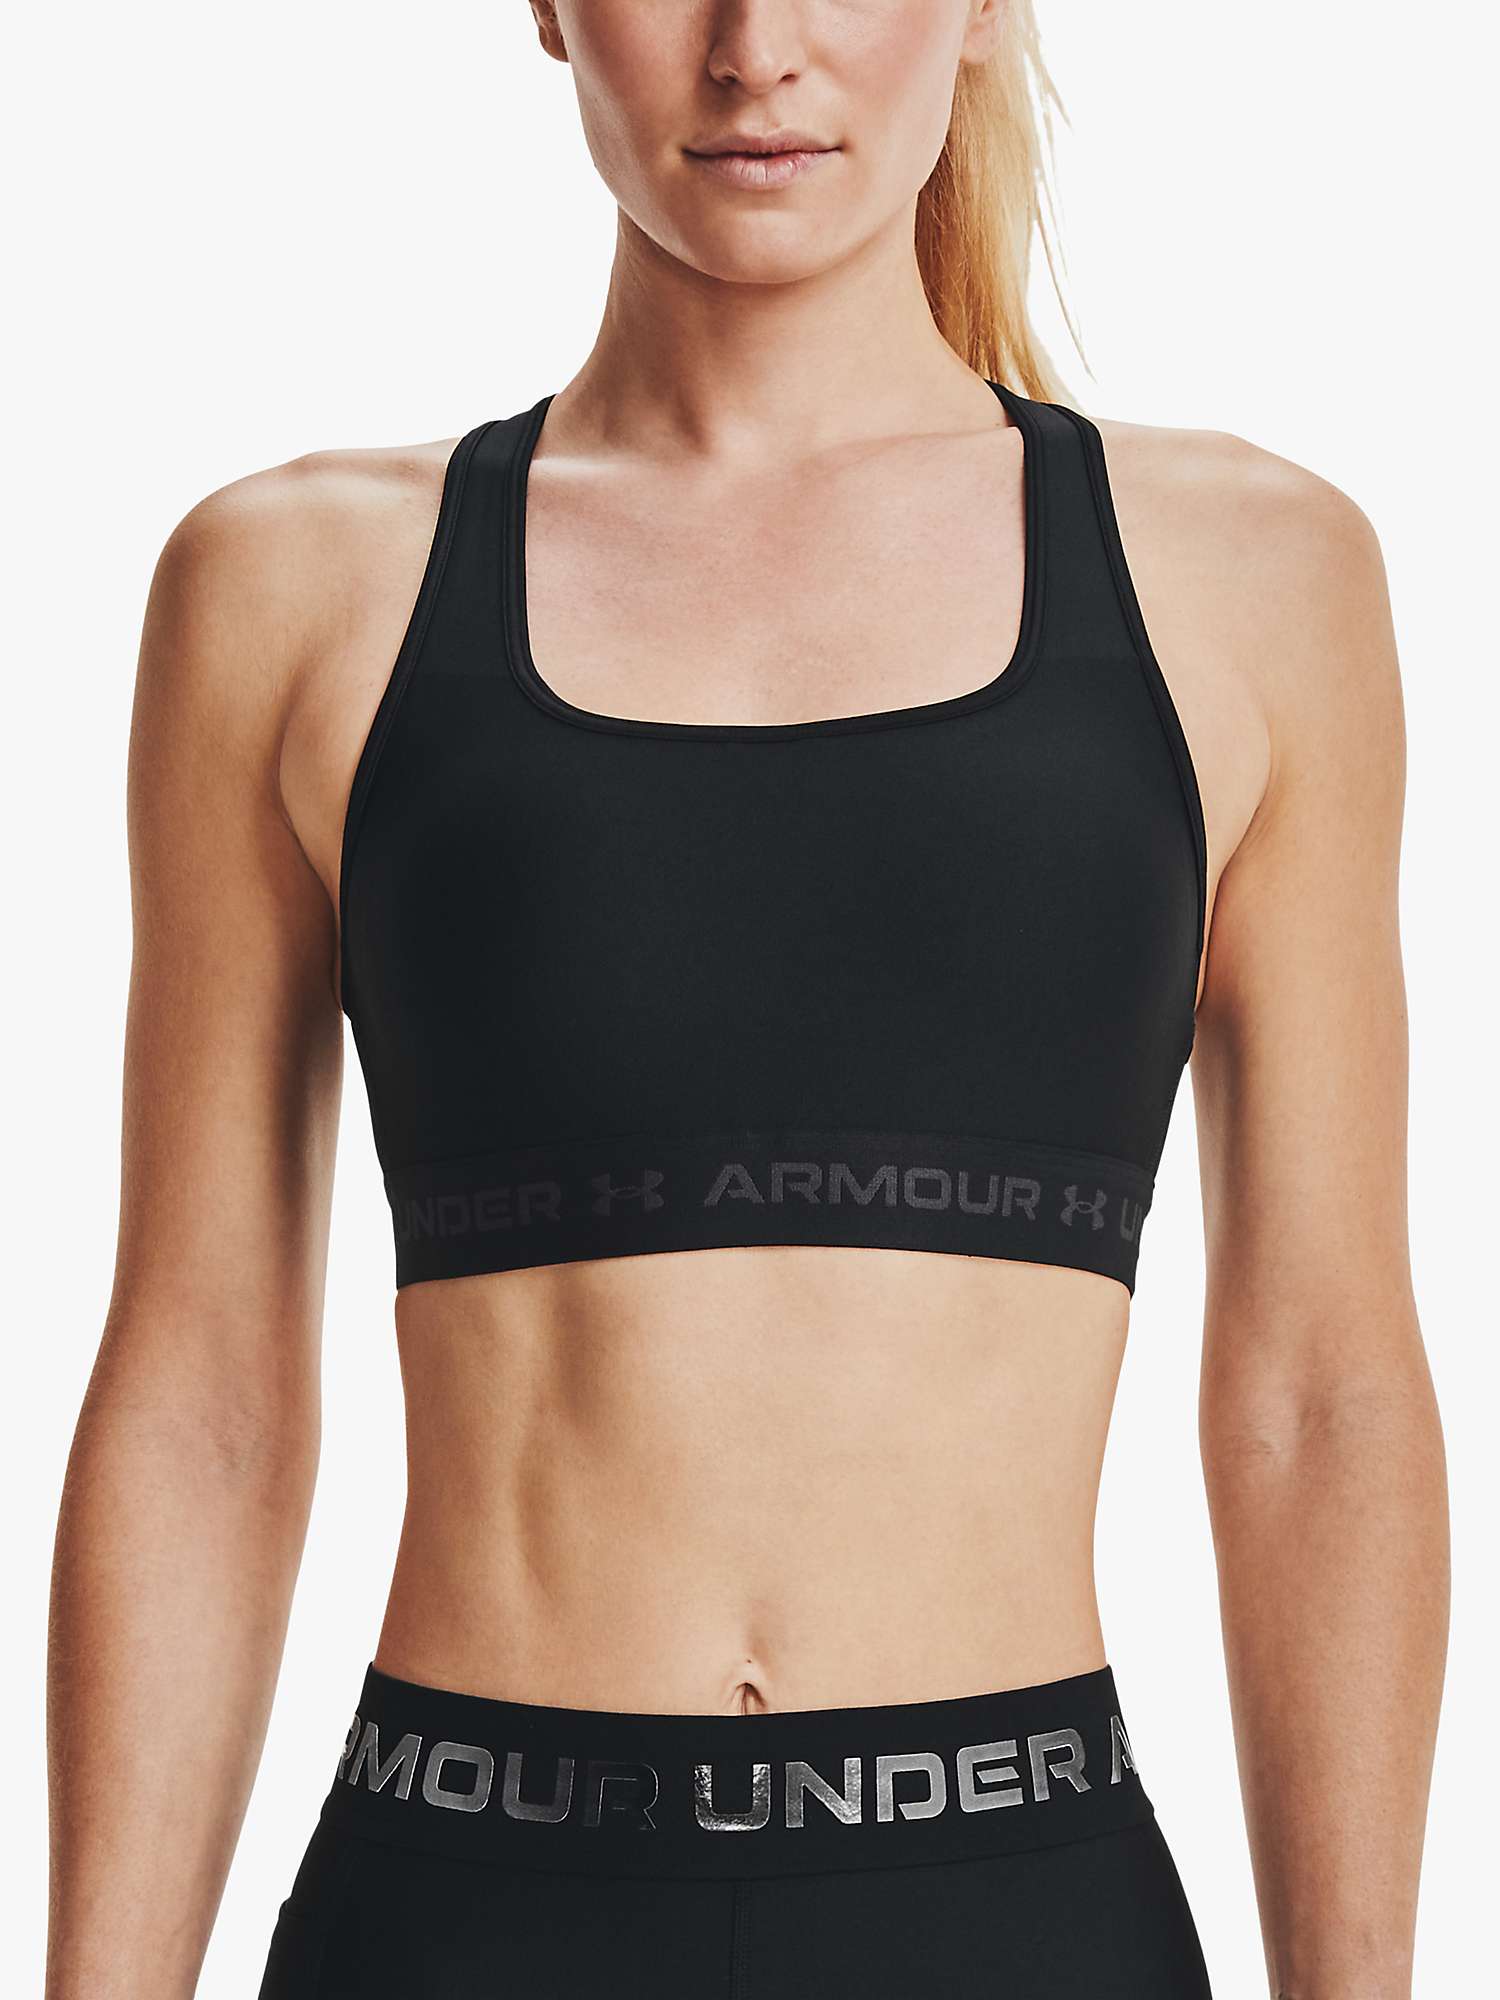 Under Armour Mid Armour Crossback Sports Bra, Black at John Lewis & Partners